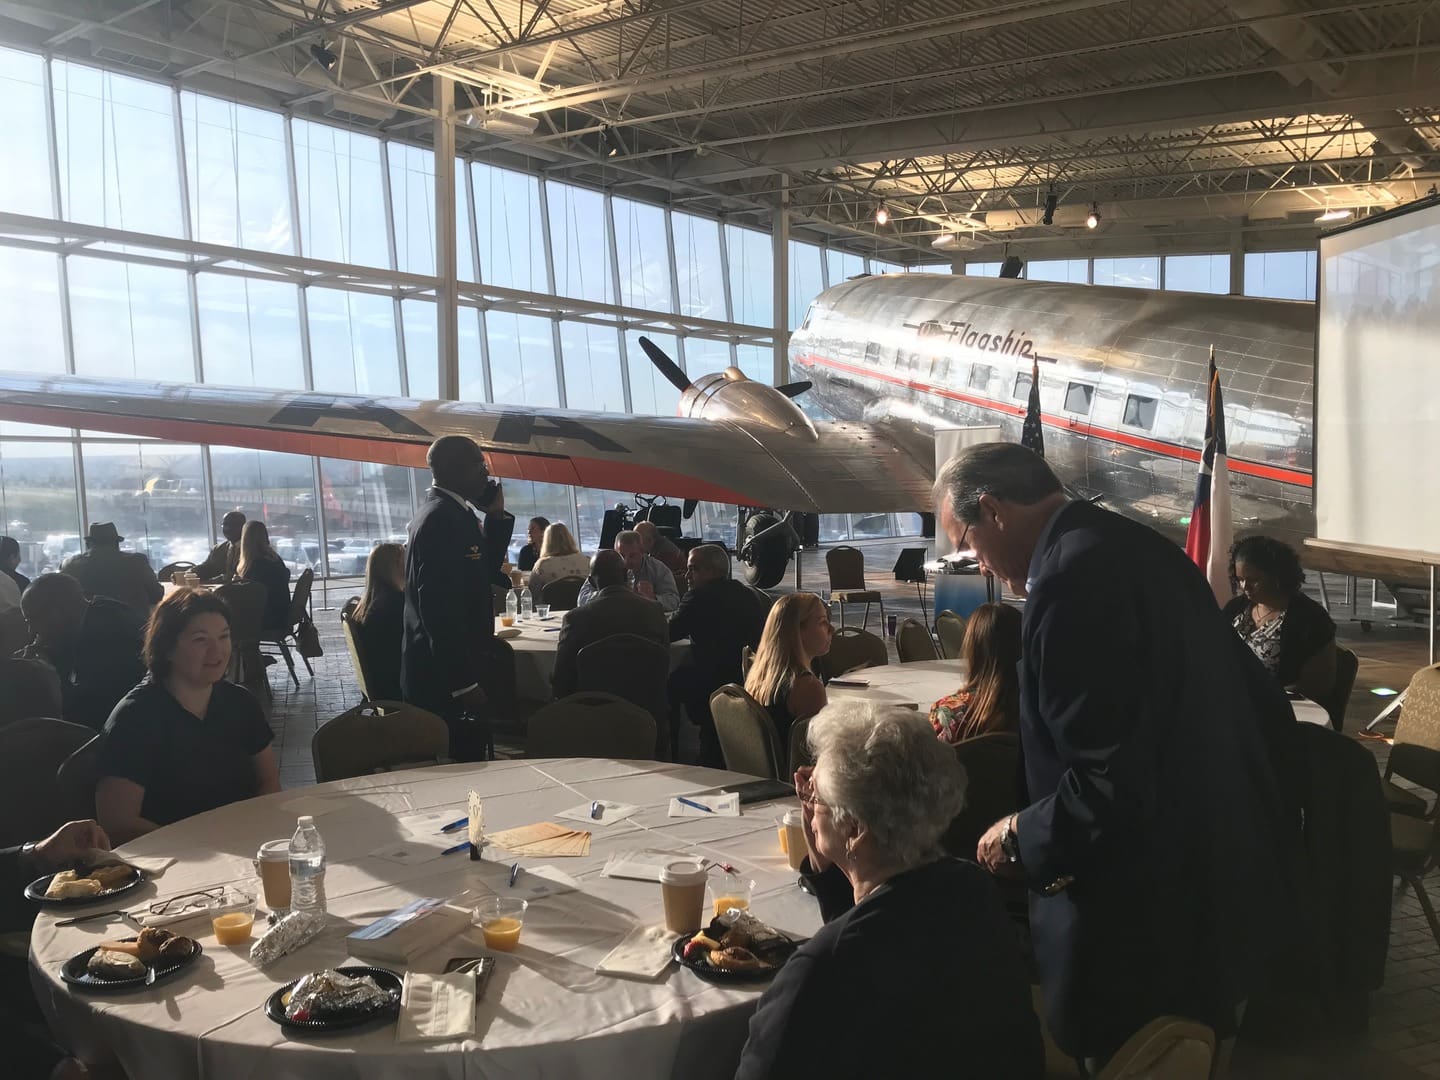 large room with windows and a plane with people eating